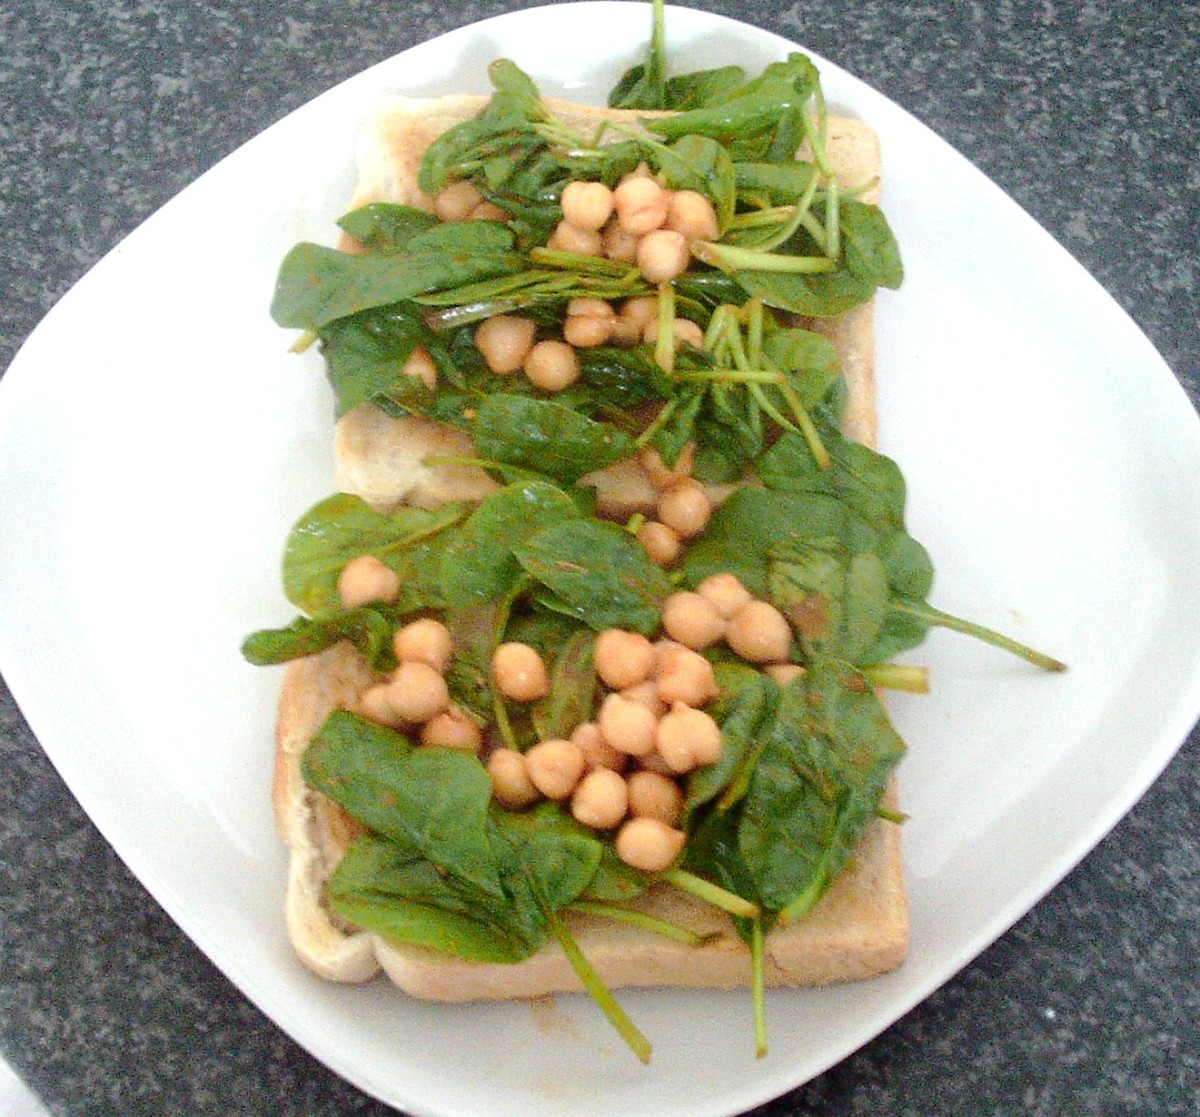 Chickpeas and spinach in tomato sauce are arranged on top of the toast